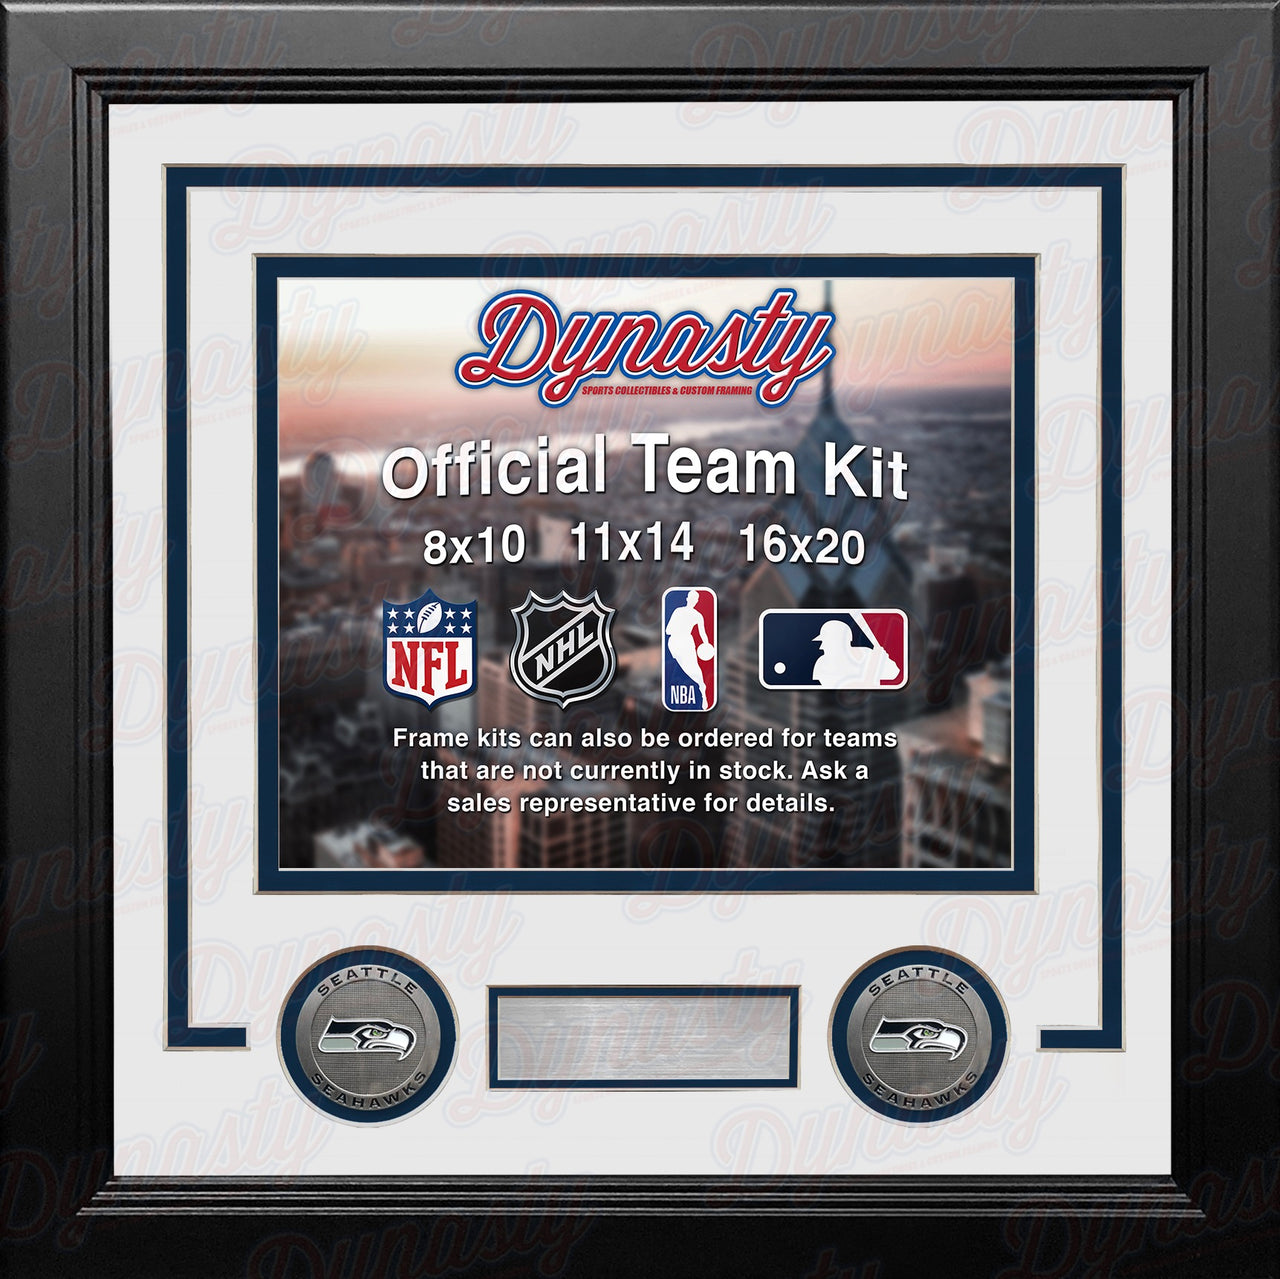 Seattle Seahawks Custom NFL Football 8x10 Picture Frame Kit (Multiple Colors) - Dynasty Sports & Framing 